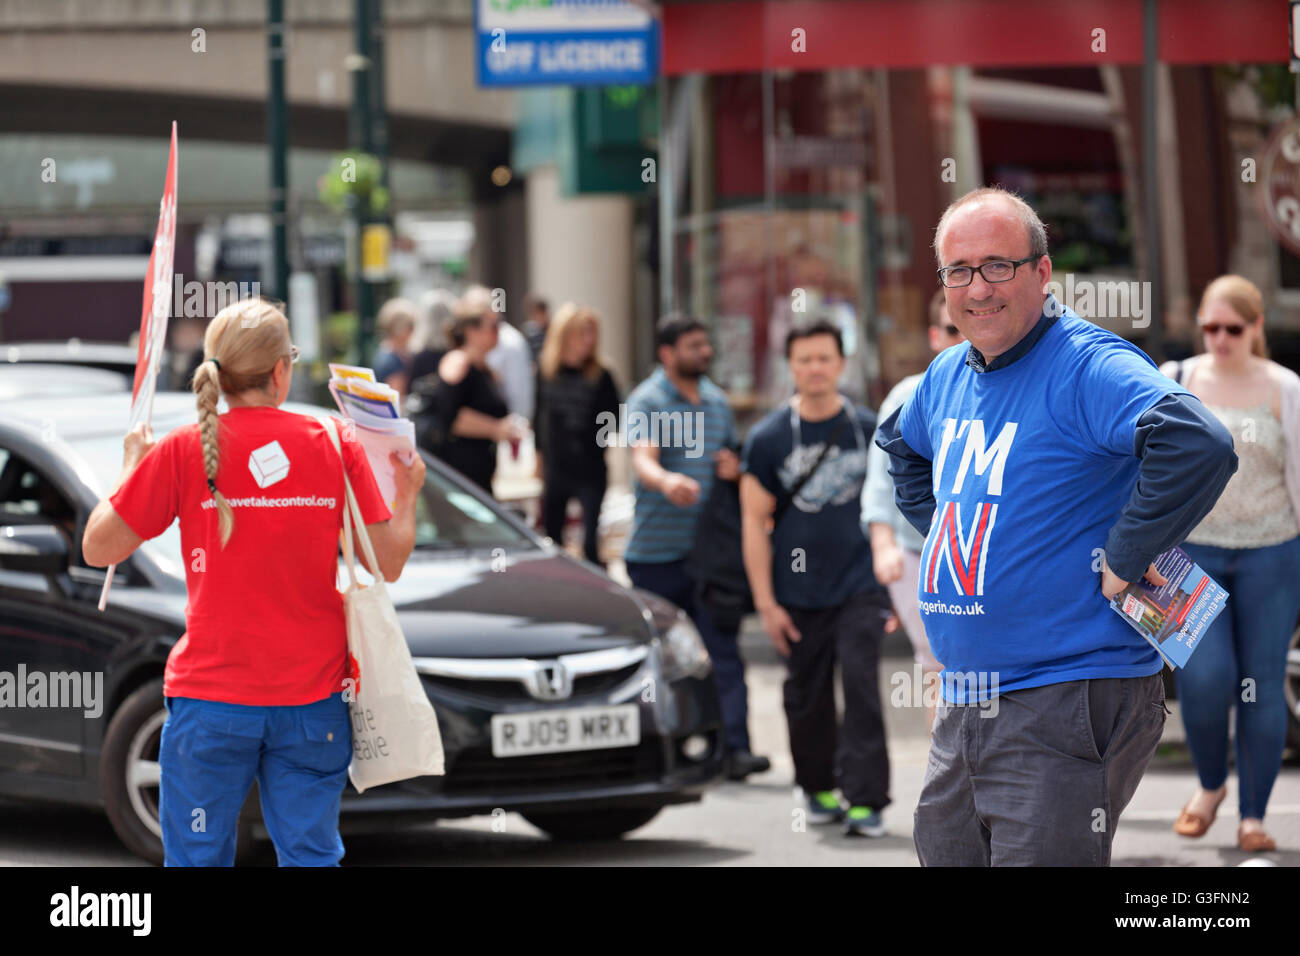 London, UK. 11 June 2016. Pro and Con Brexit Campaigners meet at Mill Hill World Village Market where the public was approached to vote in the upcoming EU referendum. Credit:  David Bleeker Photography.com/Alamy Live News Stock Photo